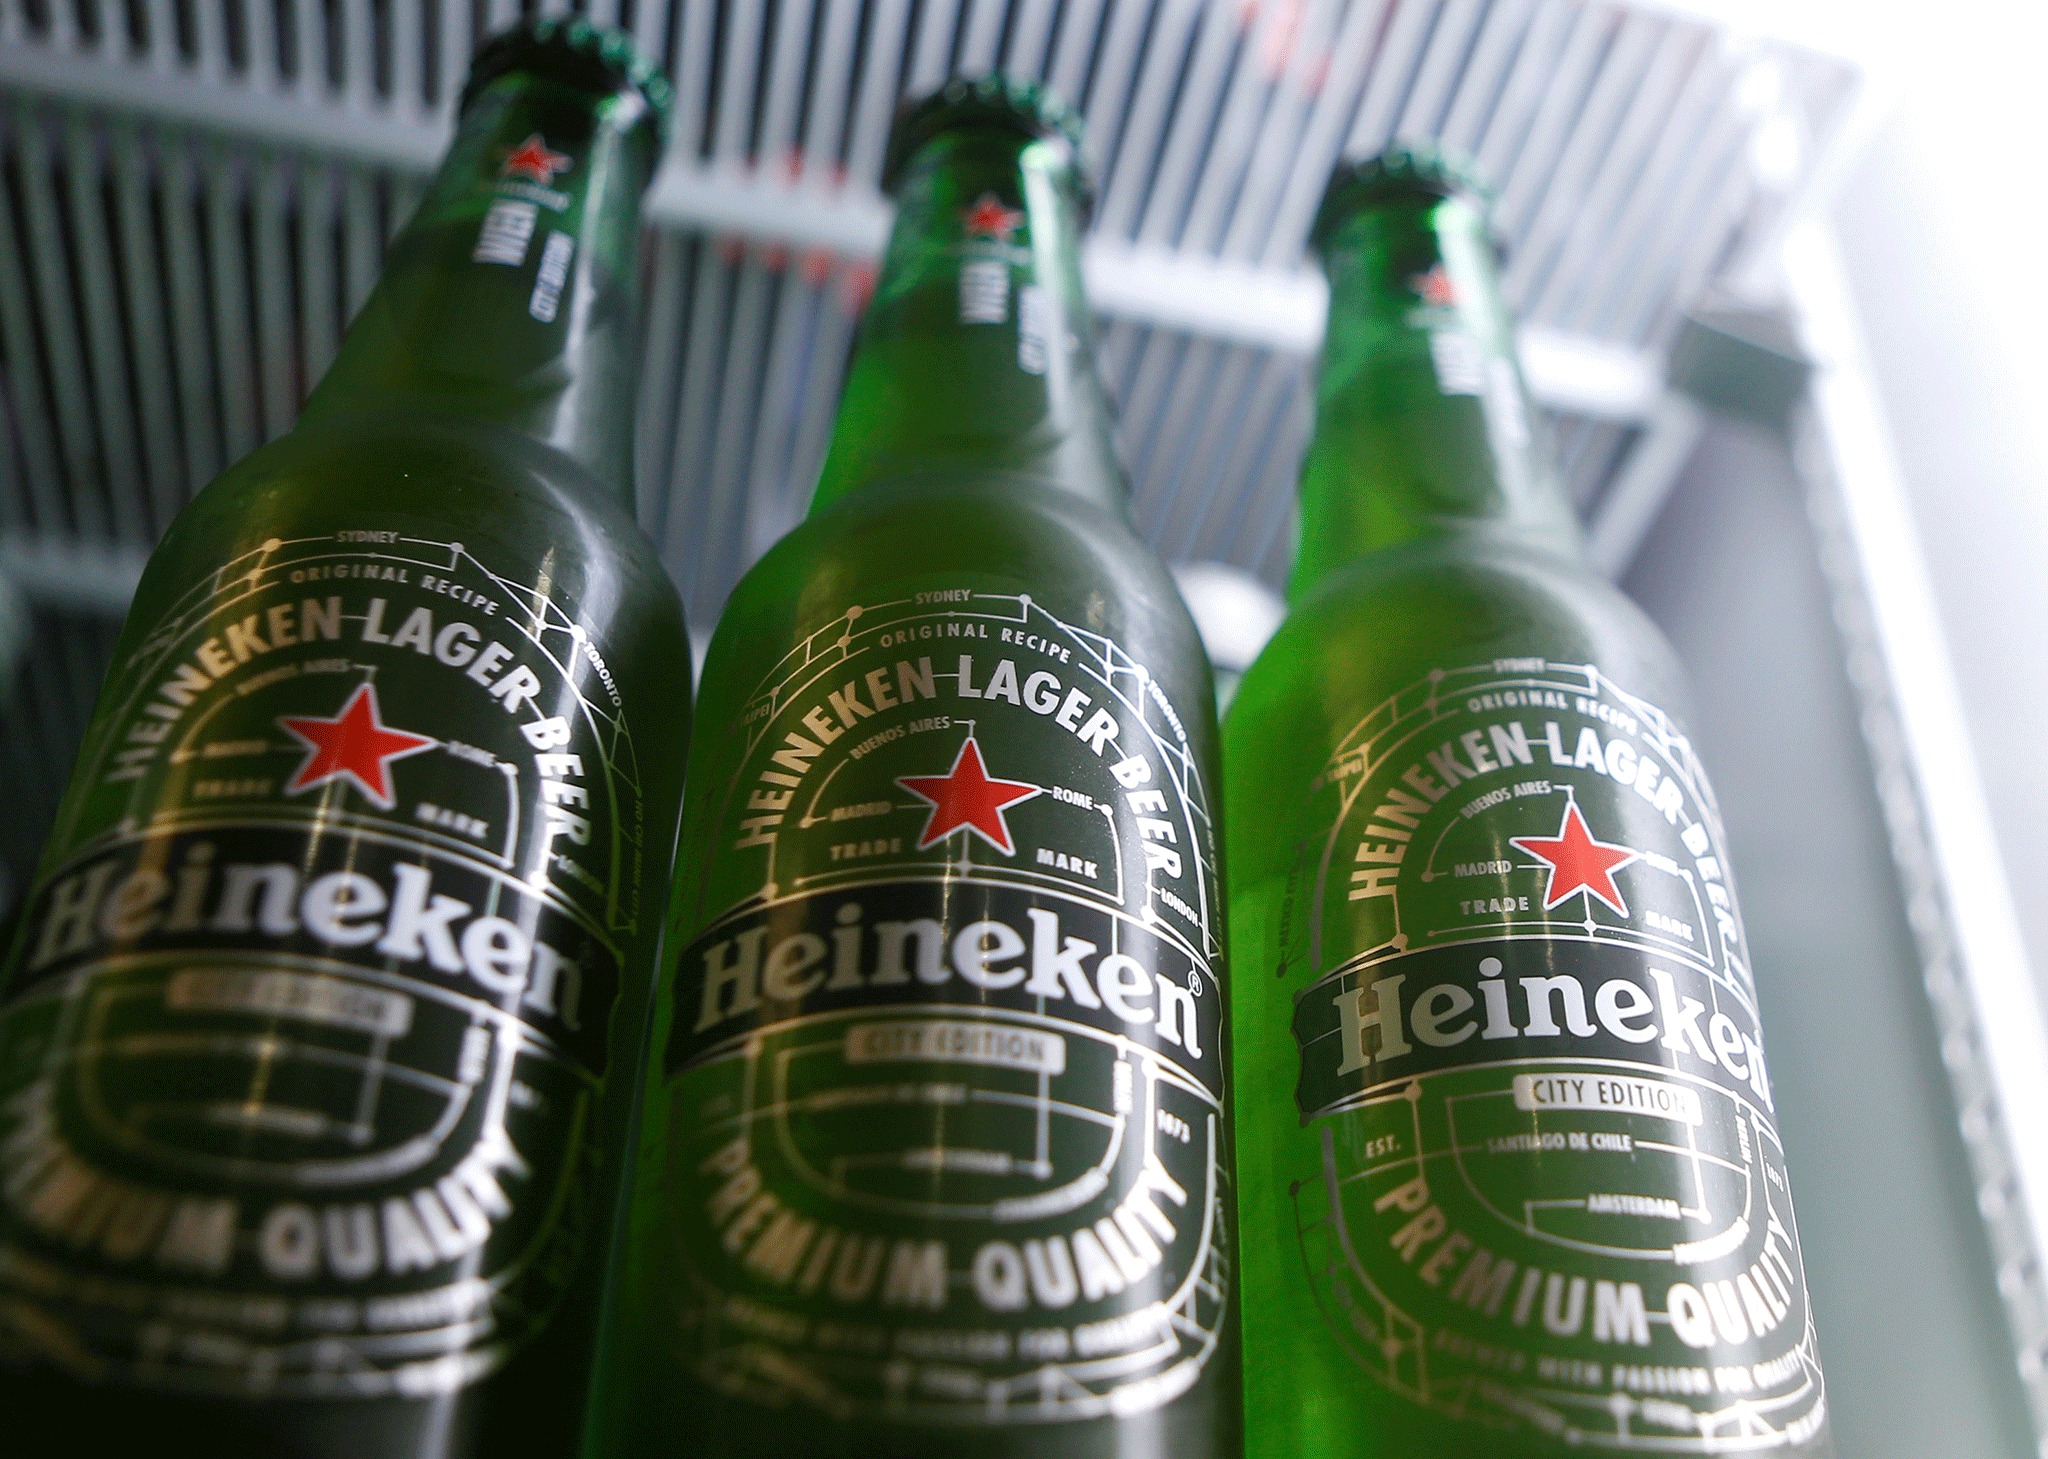 Heineken is close to acquiring some 1,900 pubs in Britain from Punch Taverns